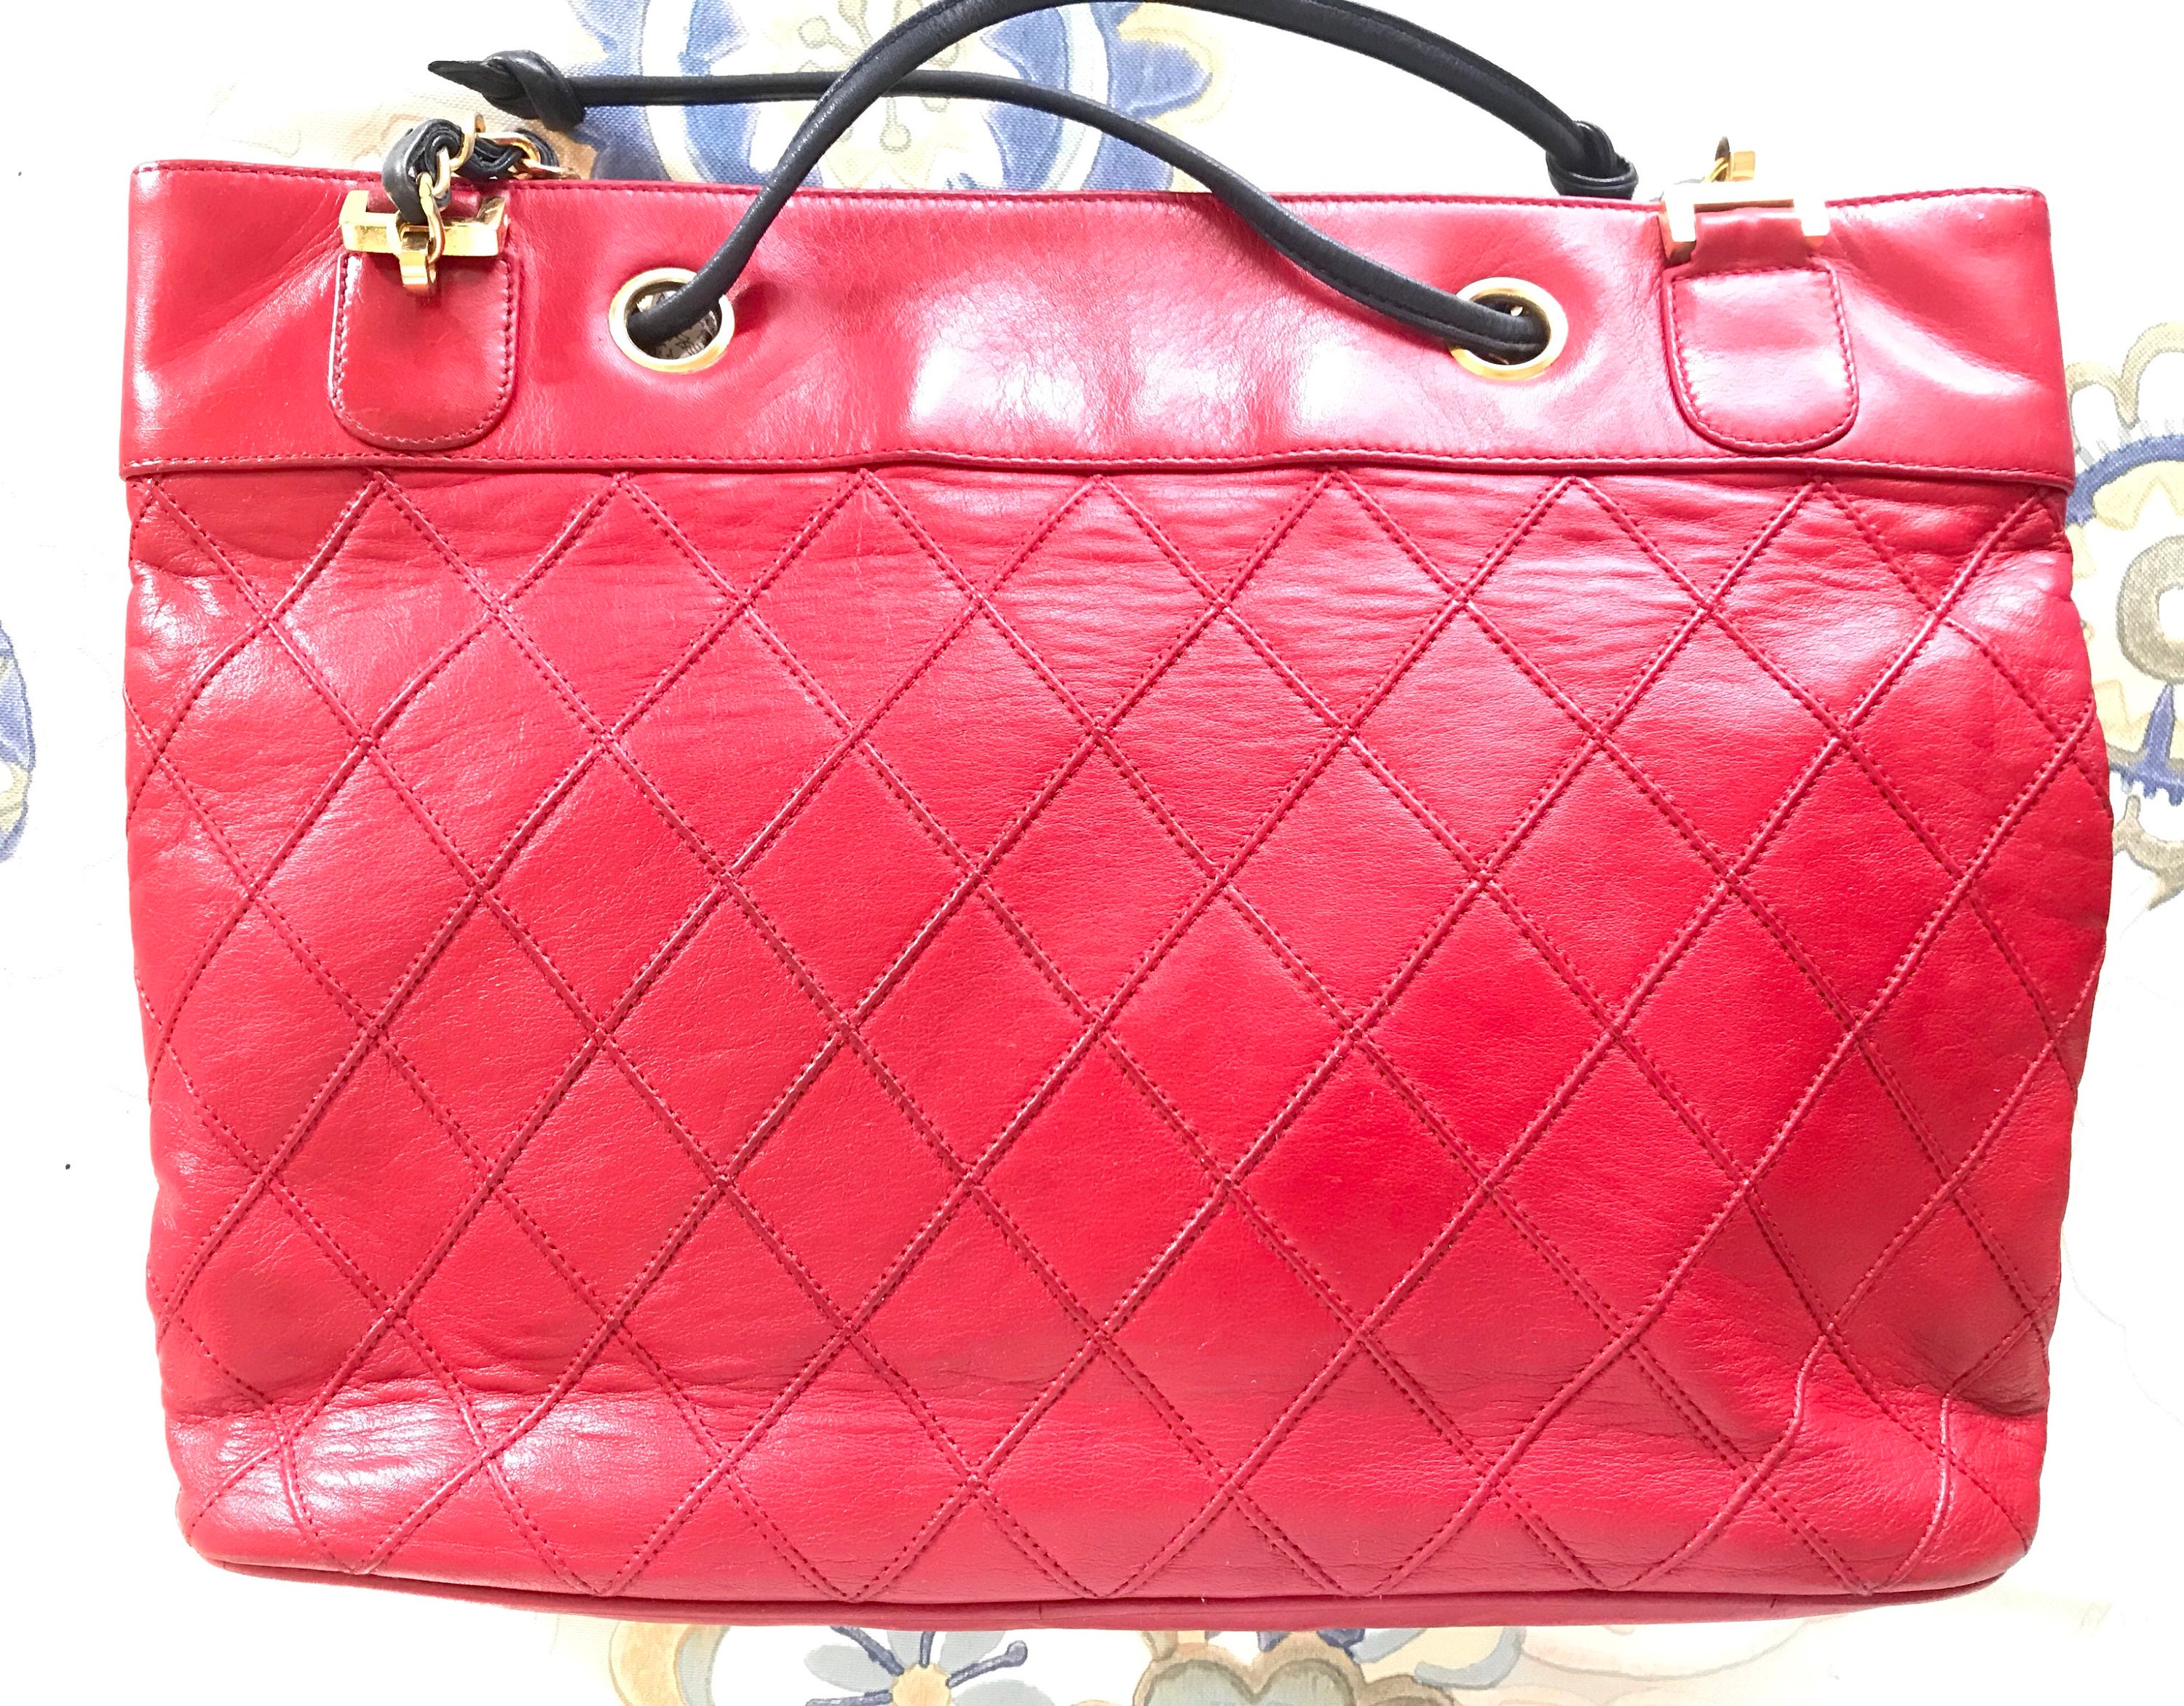 Buy Vintage CHANEL Classic Tote Bag in Red Leather With Gold Tone